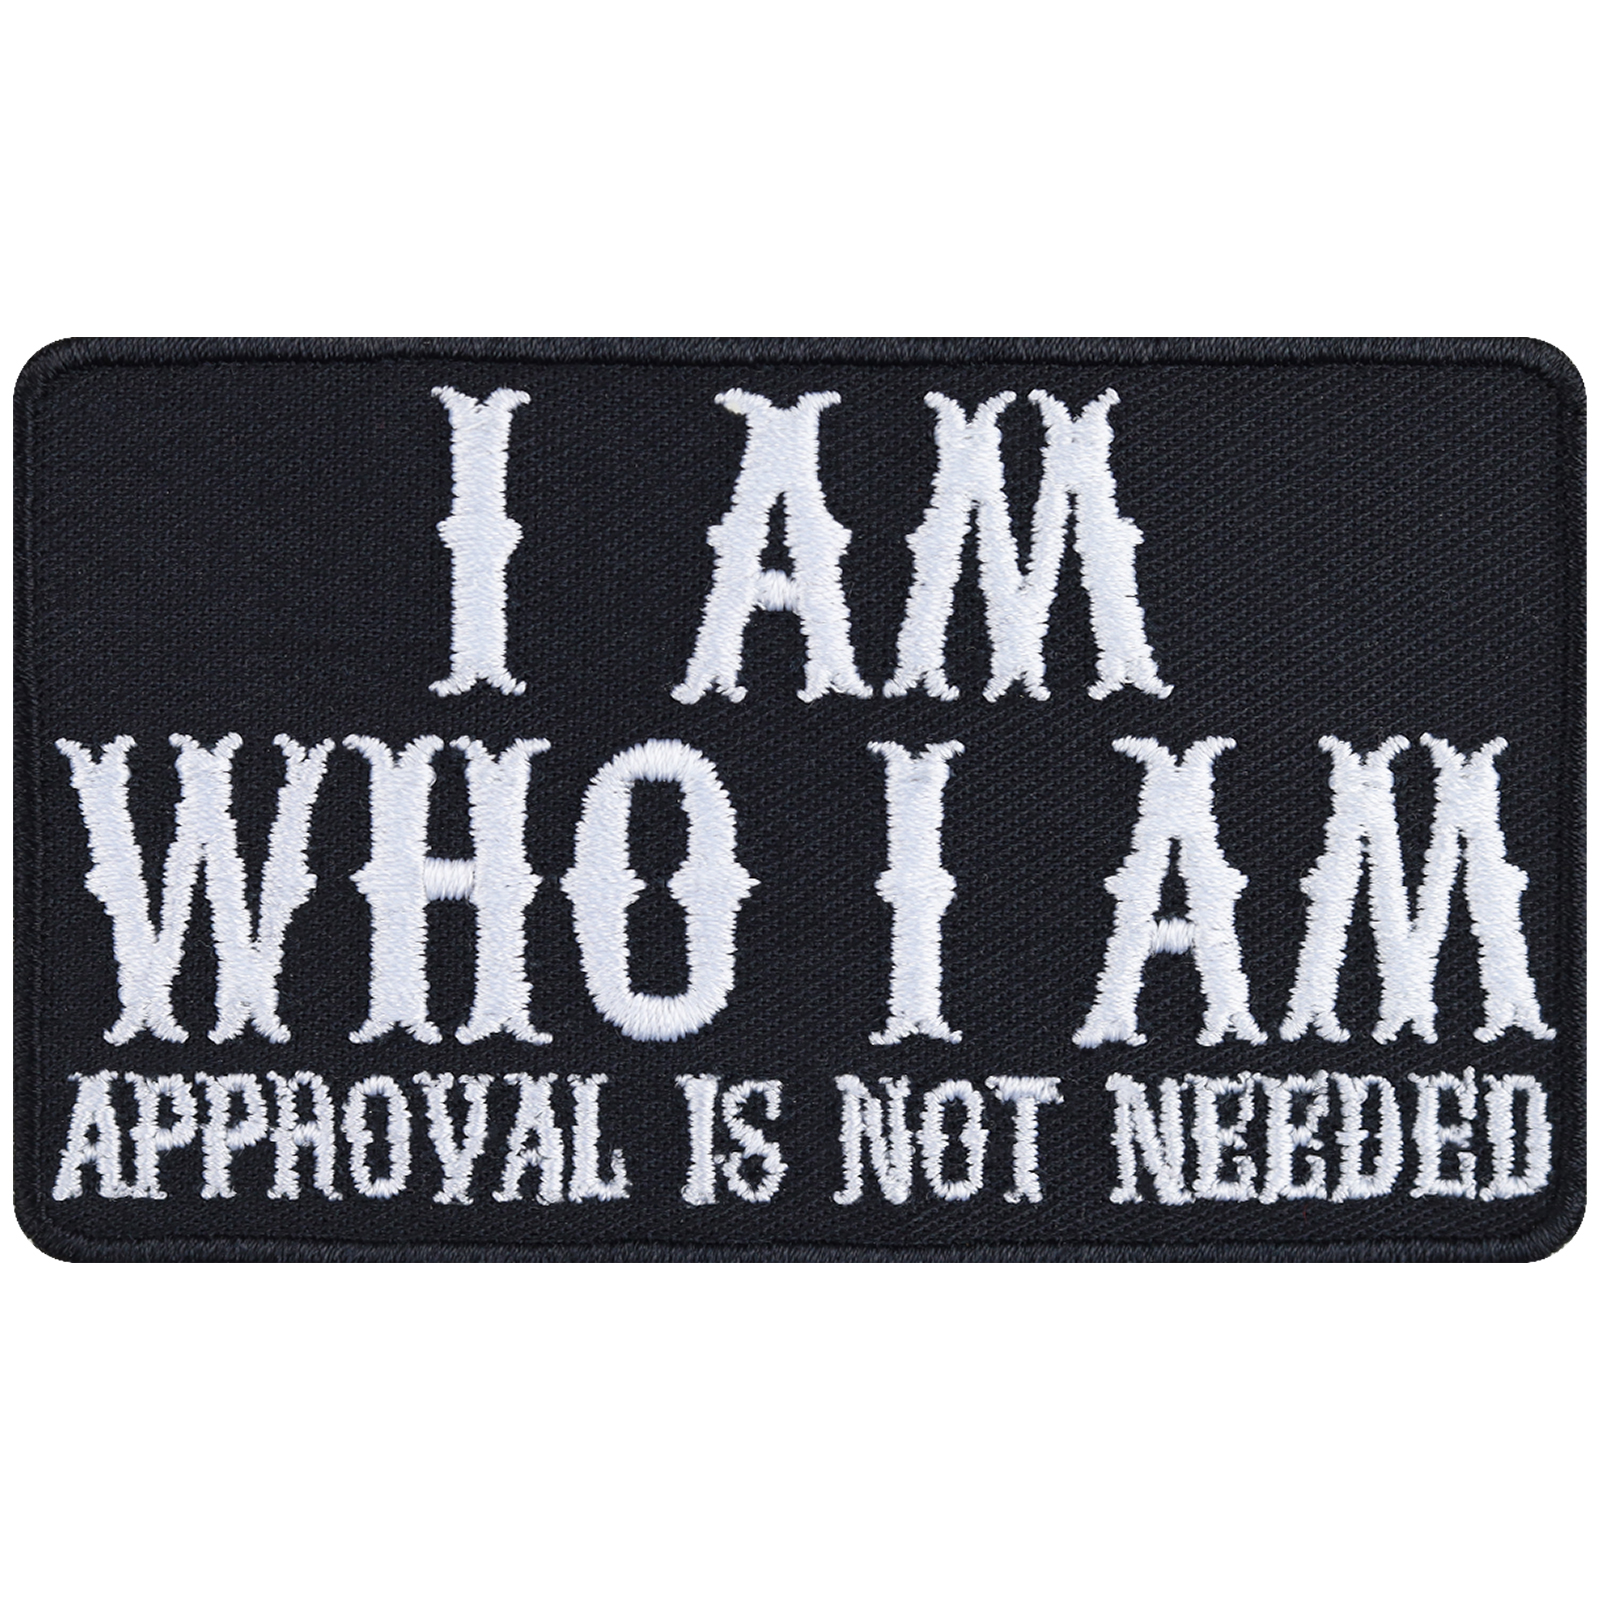 I am who I am (Approval is not needed) - Patch